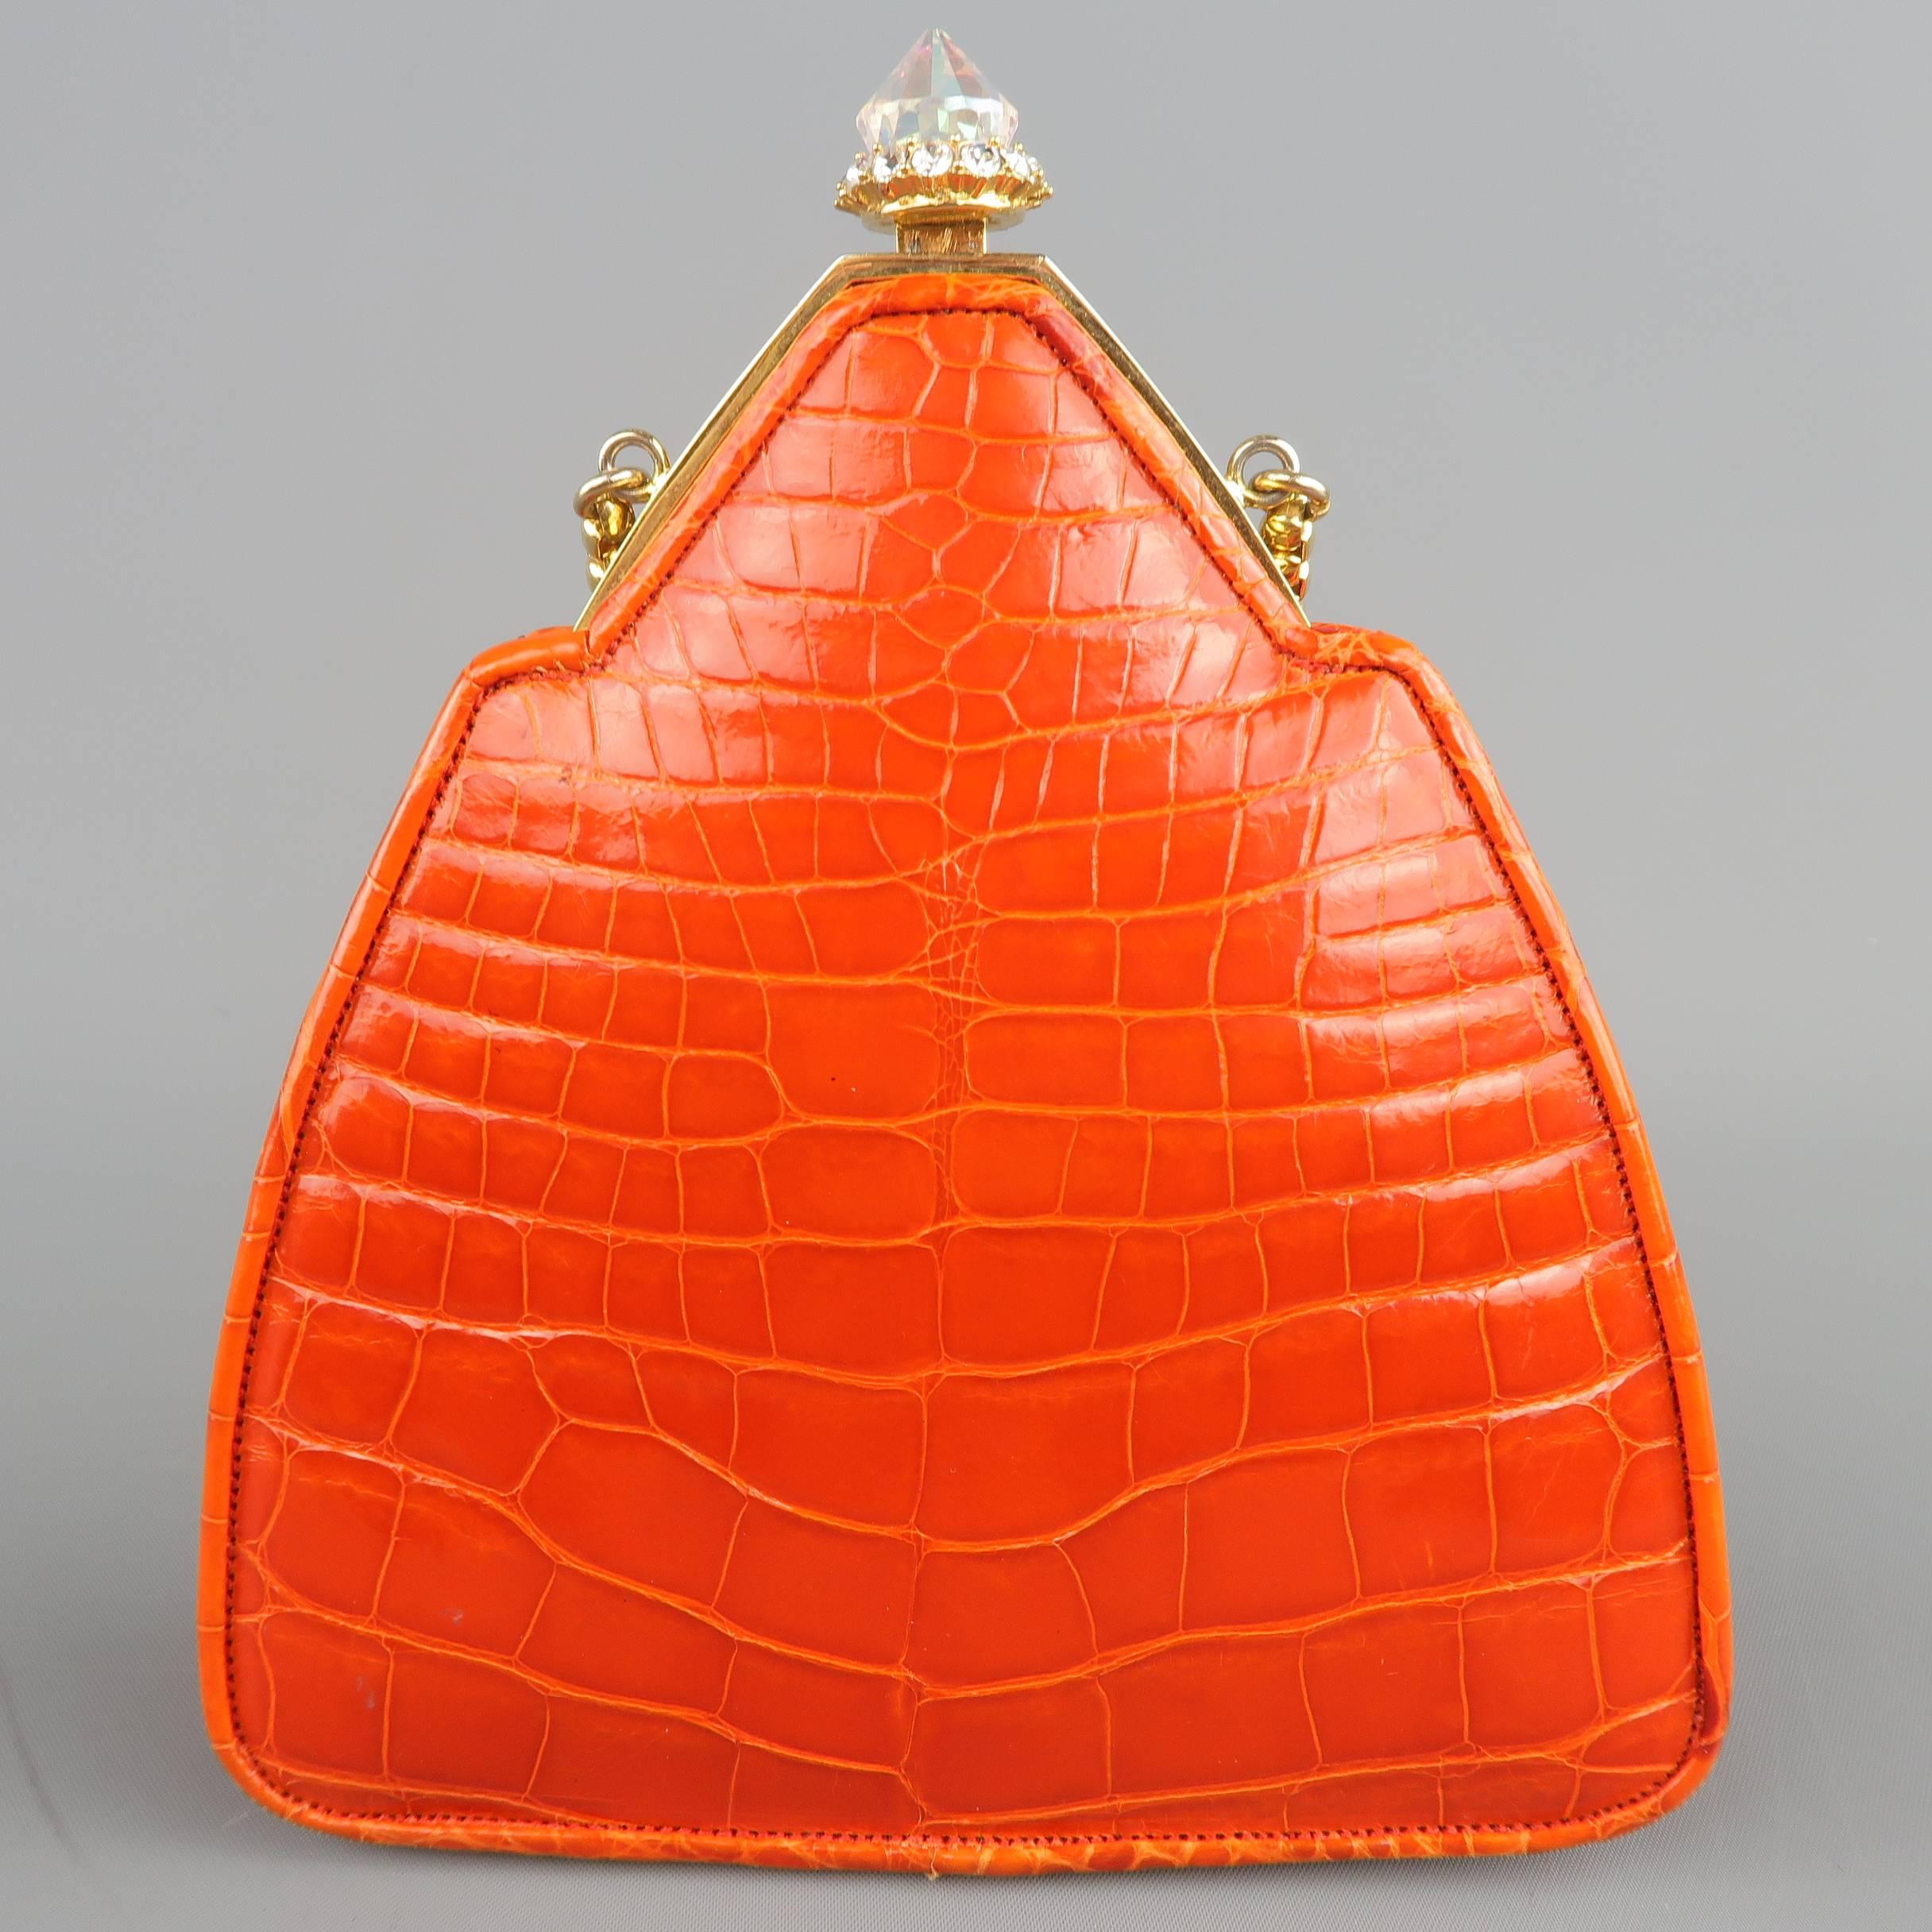 Vintage JUDITH LEIBER purse comes in a vibrant orange alligator leather and features a gold tone clasp with pointed Aurora Borealis jewel surrounded by clear rhinestones, chain strap, and silk satin liner. Minor wear.
 
Good Pre-Owned Condition.
